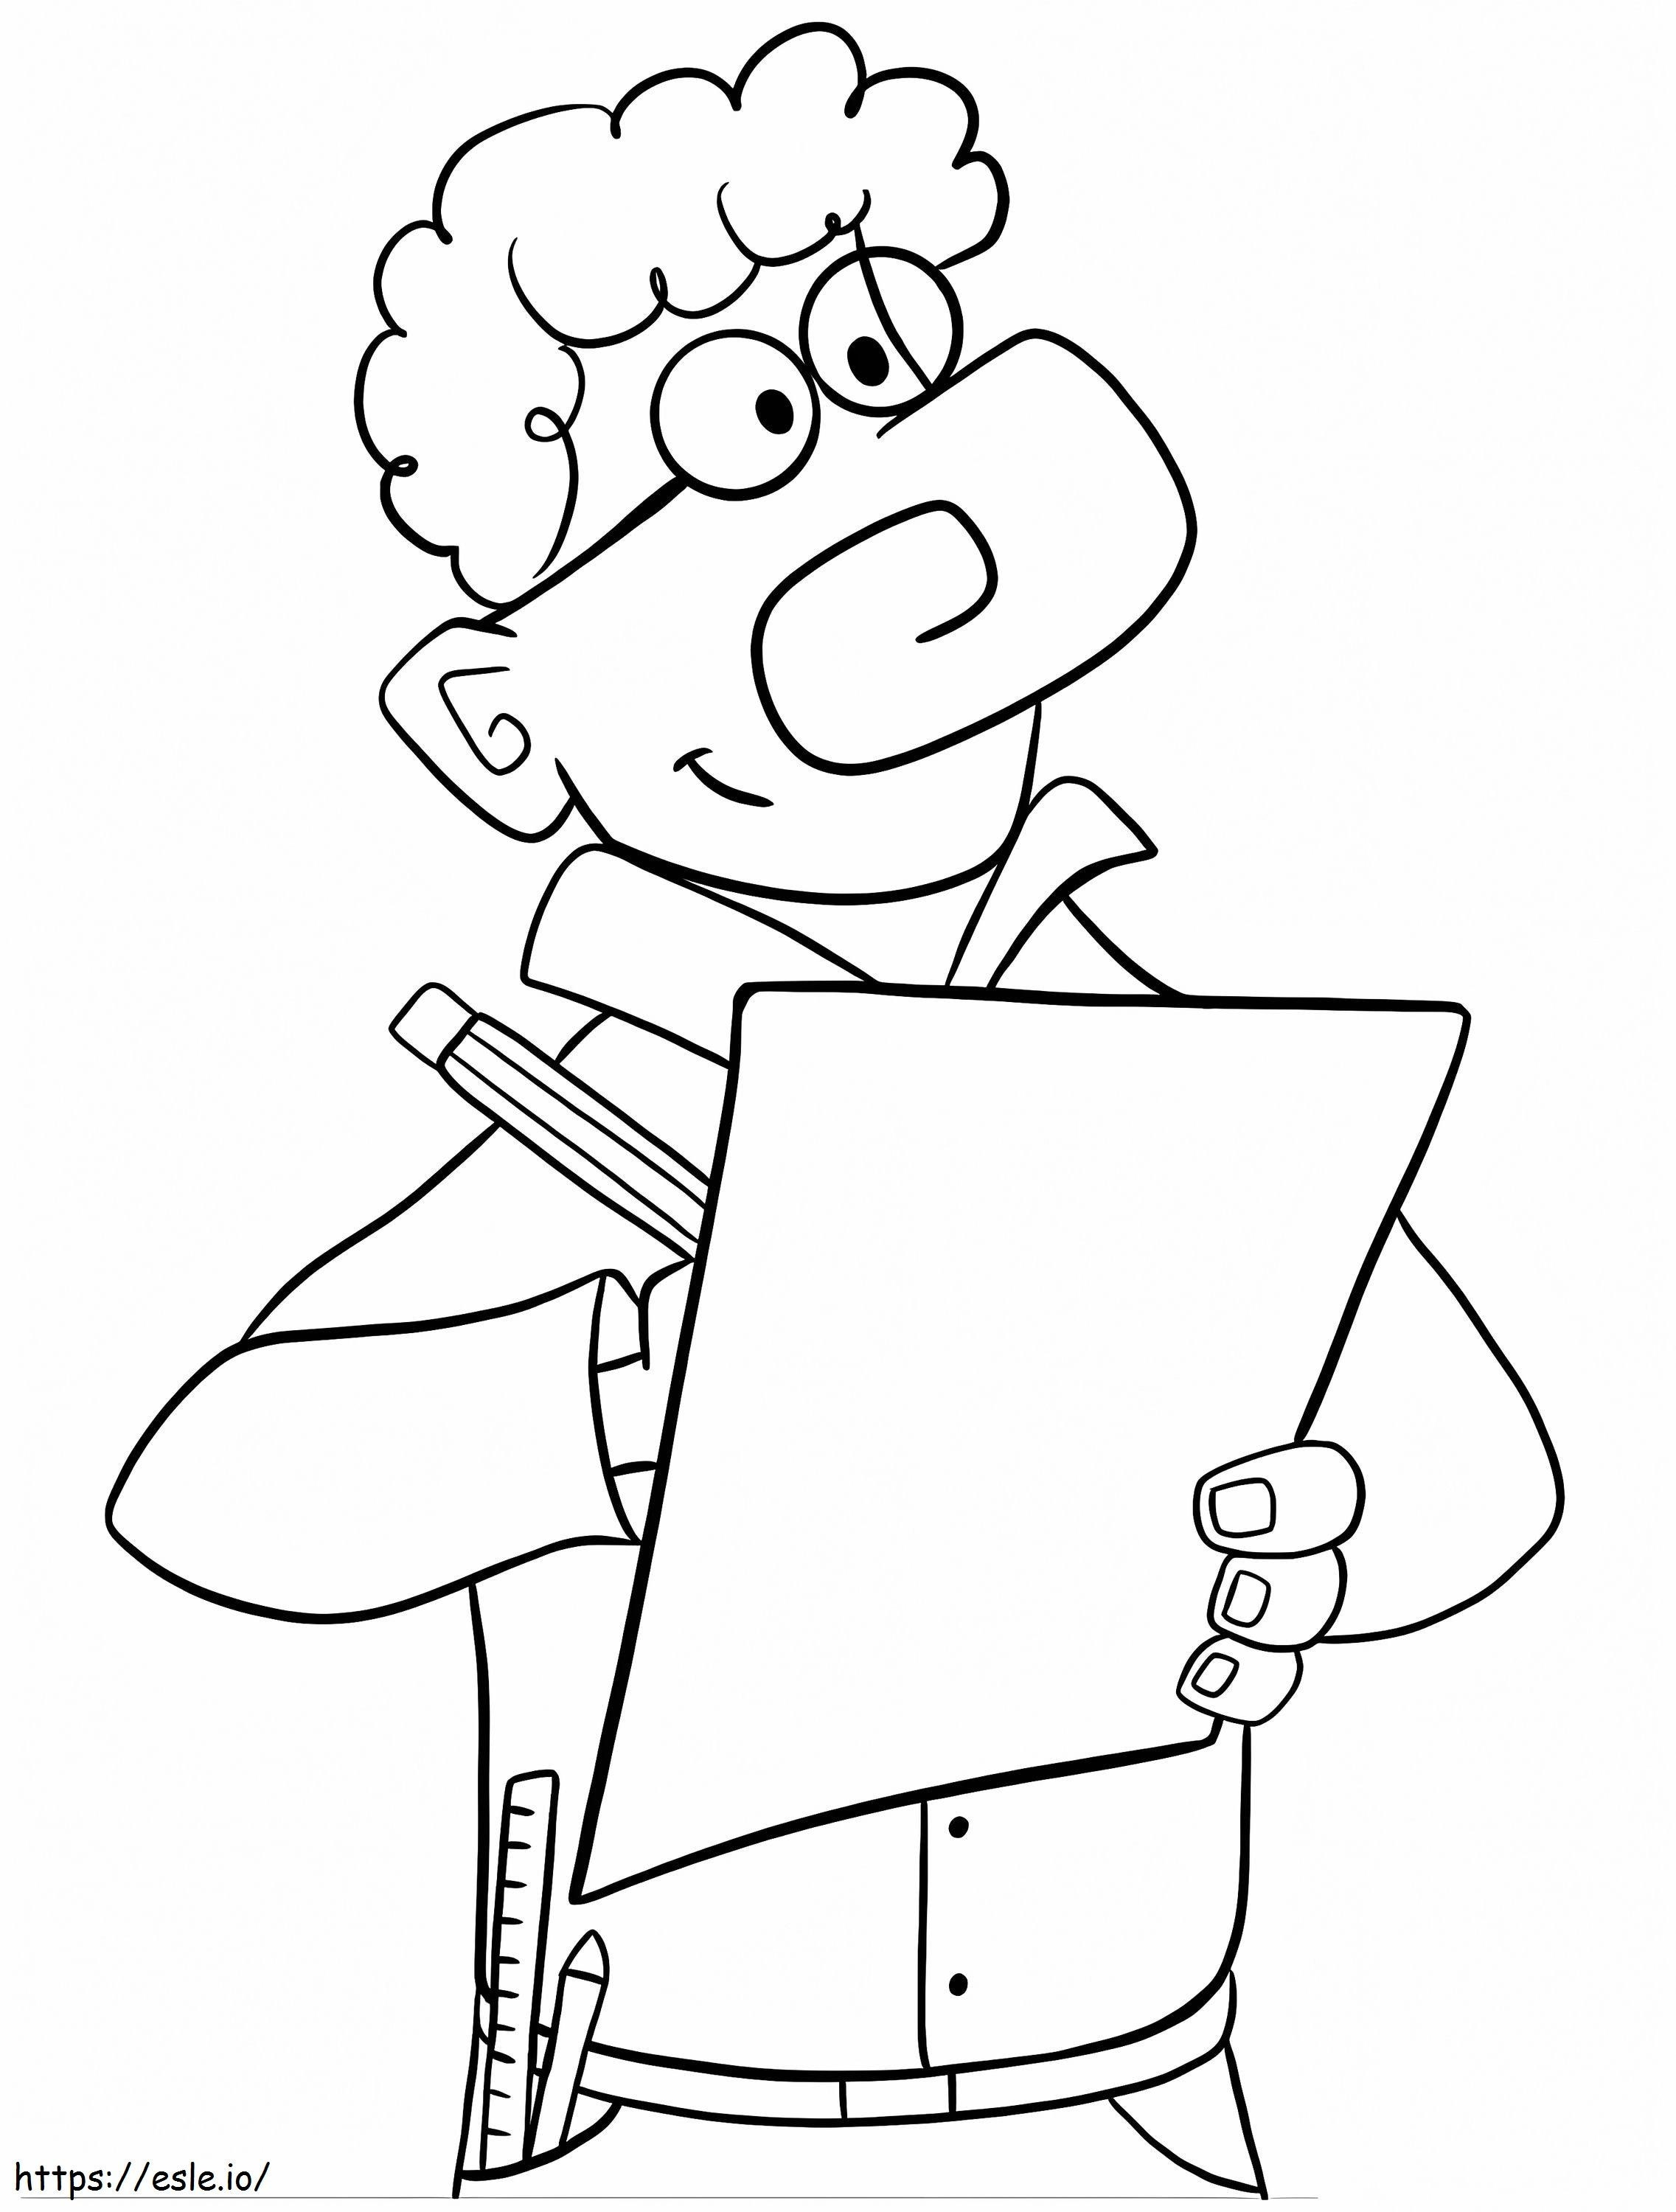 Engineer Writing coloring page